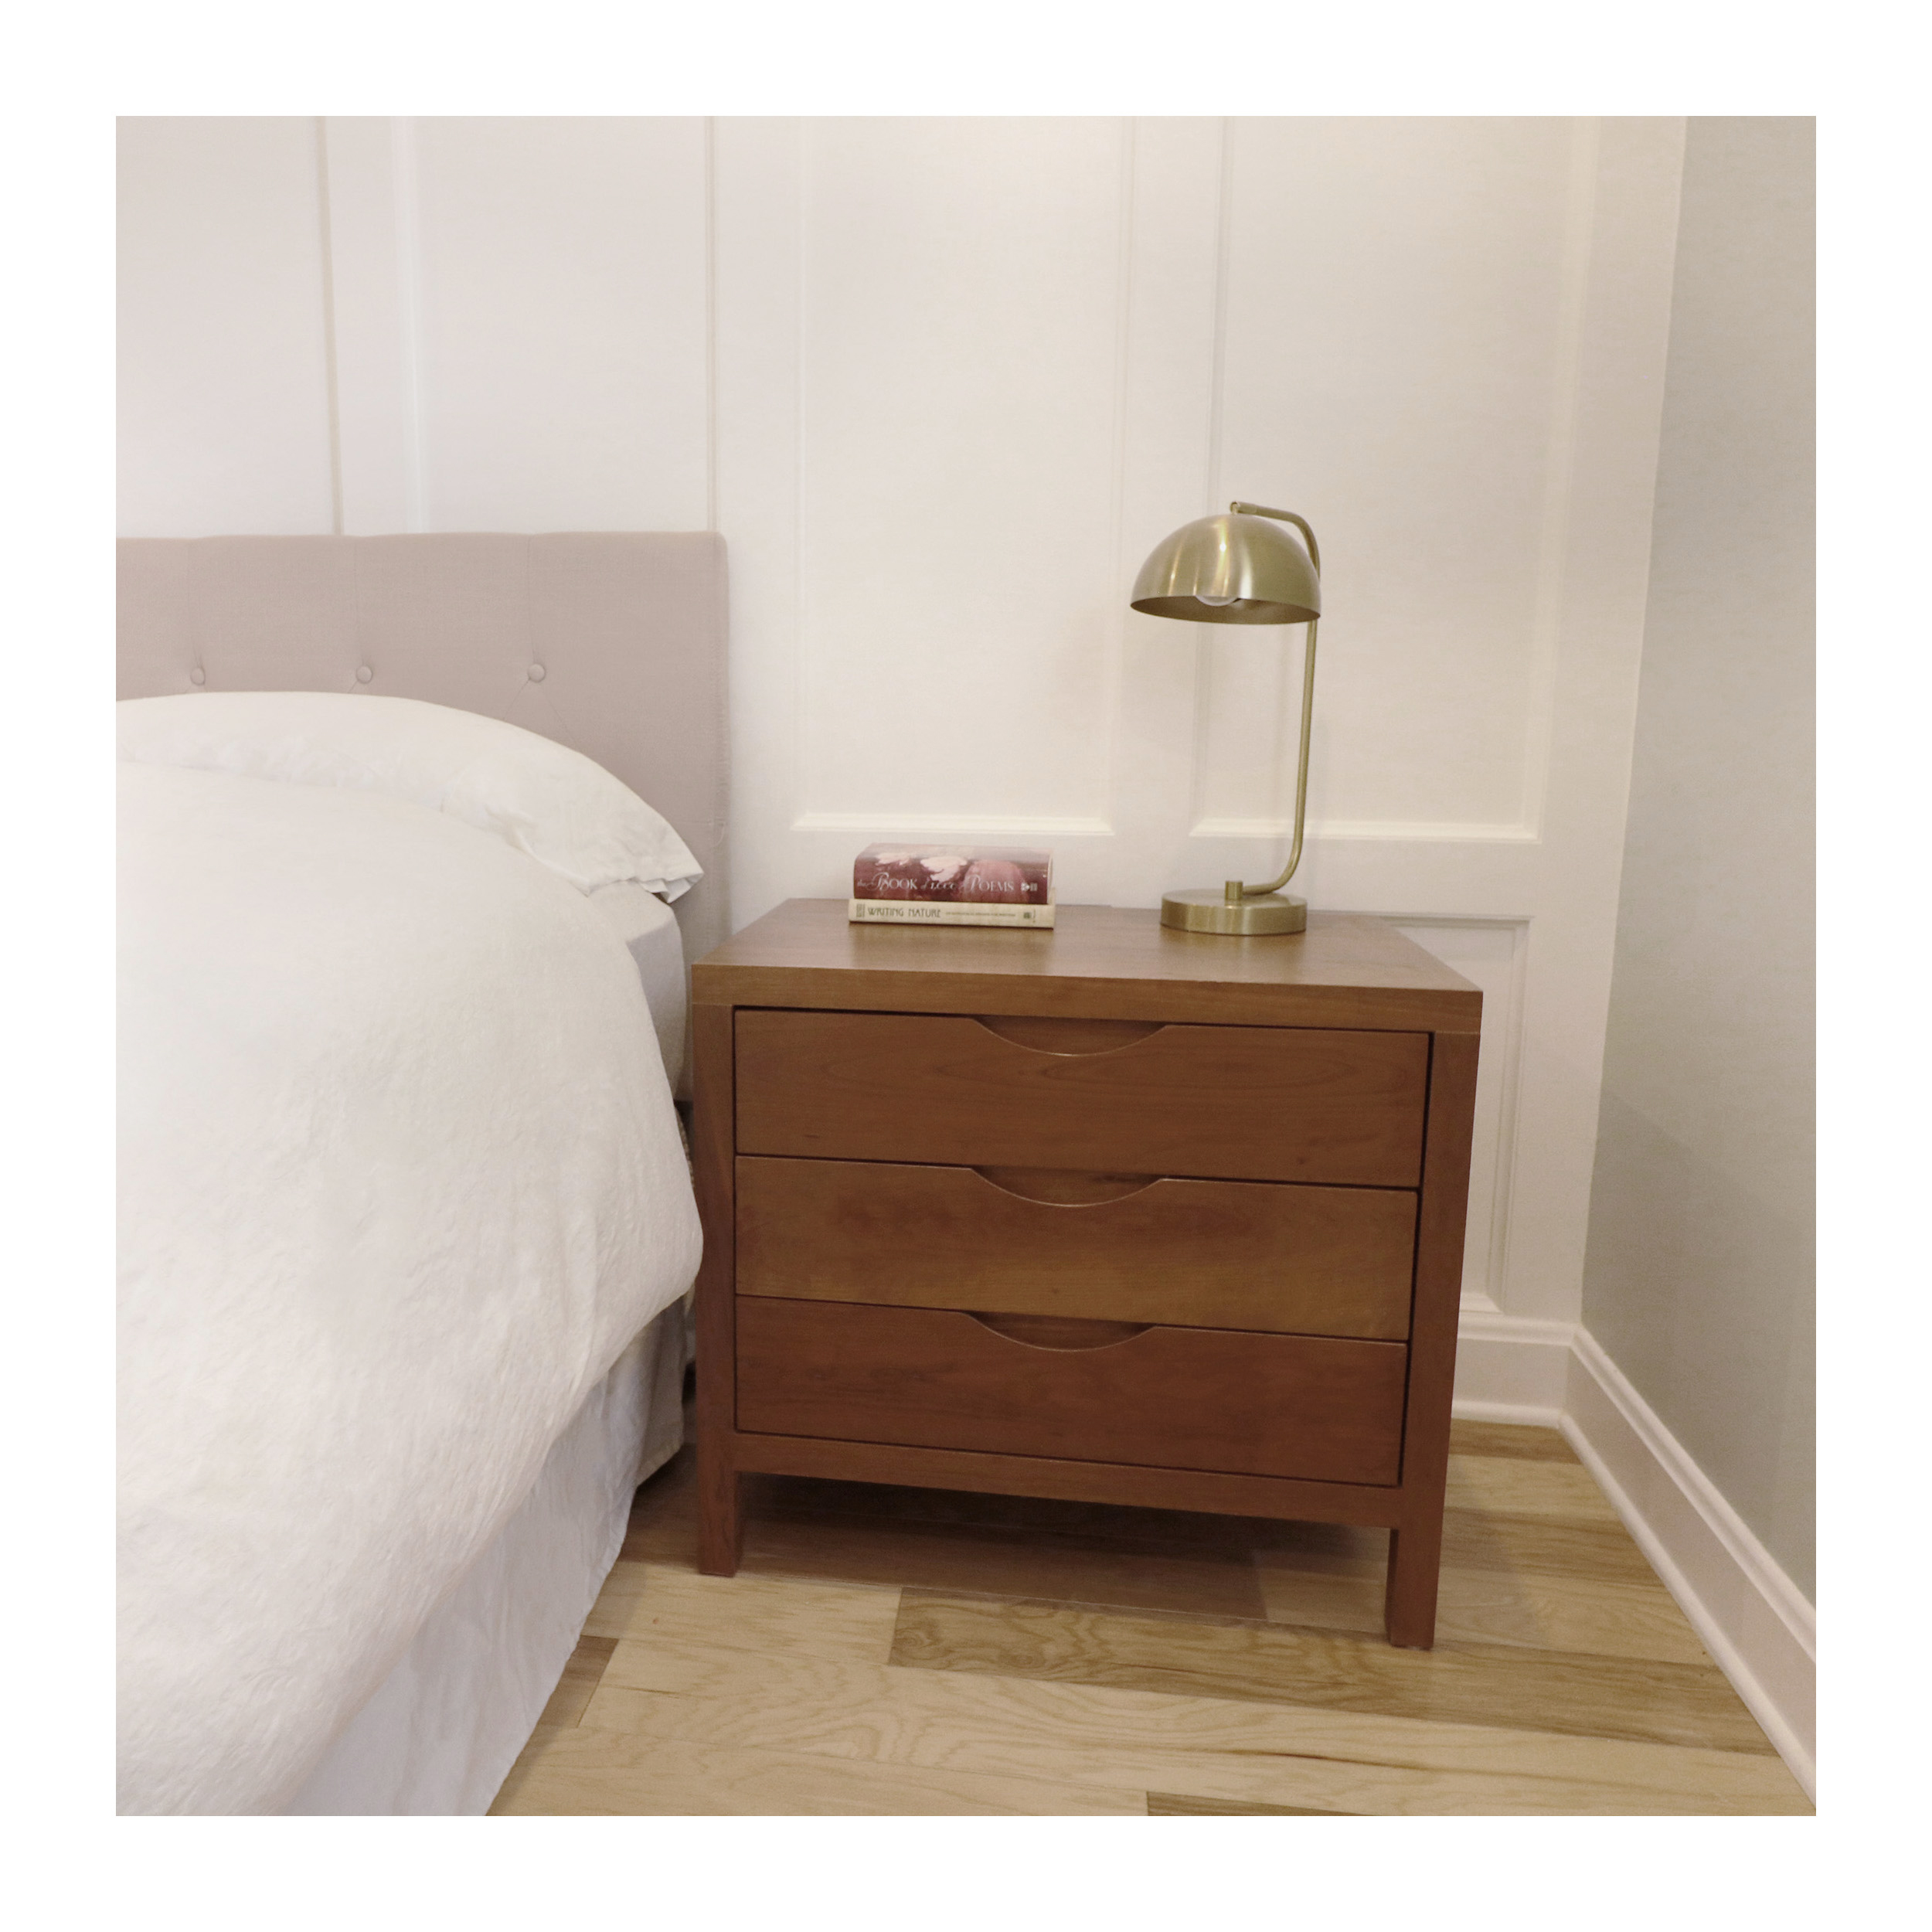 Series 353 Bedside Table With Three Drawers